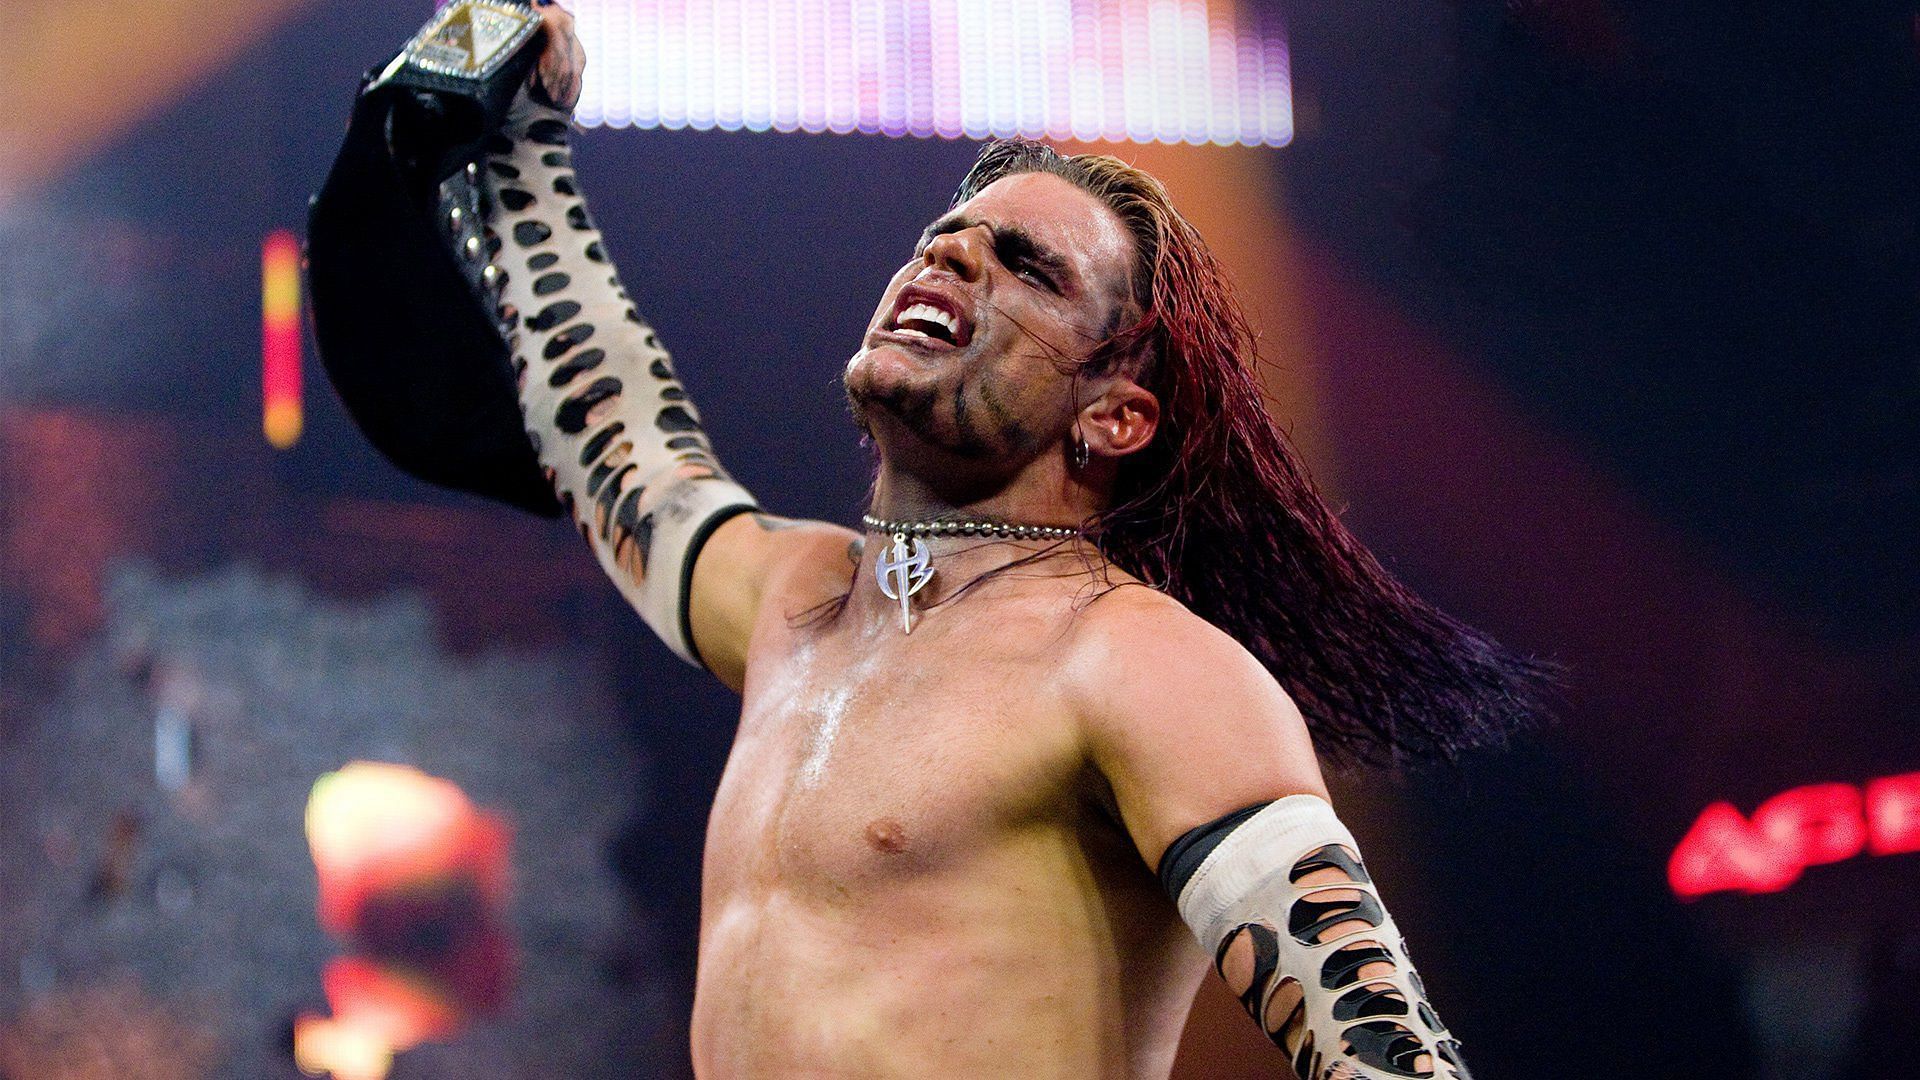 Jeff Hardy is a resident of North Carolina, United States